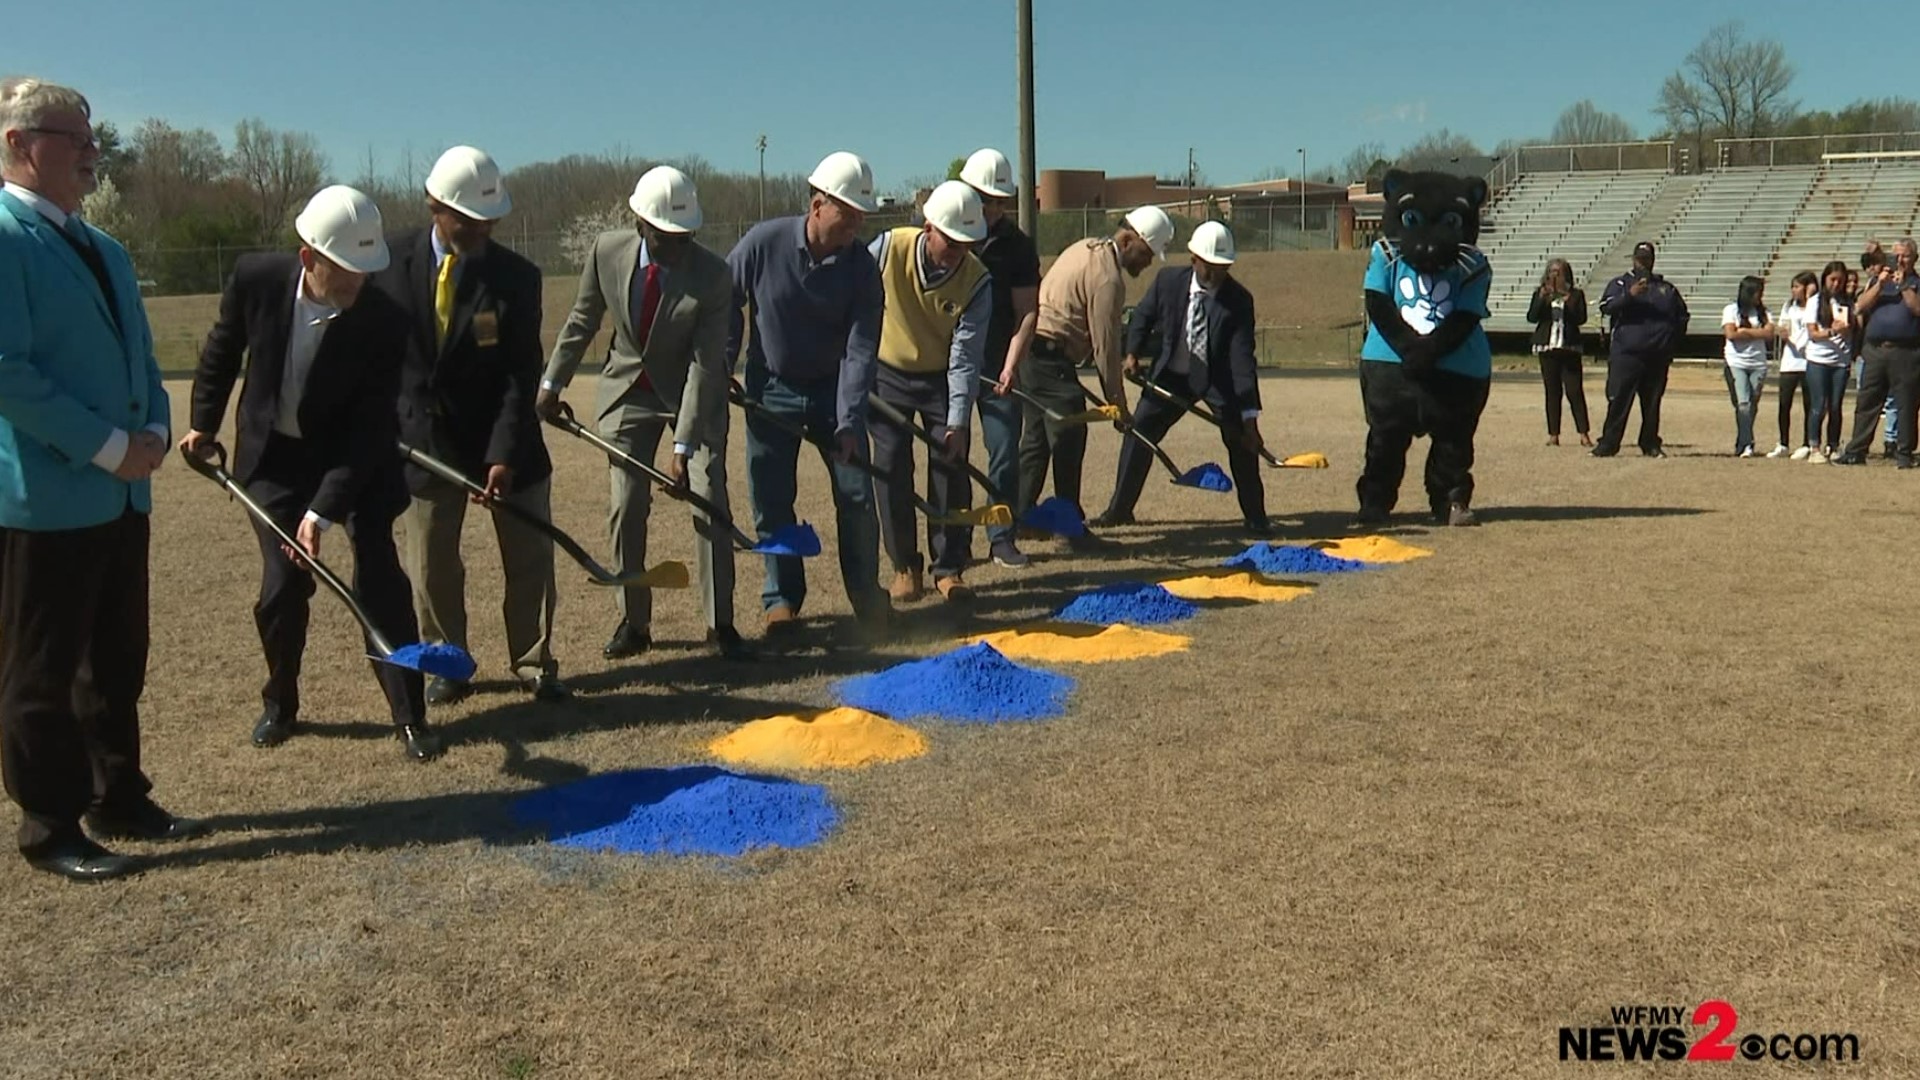 Reidsville High School is getting a new turf football field thanks to a grant provided by the Carolina Panthers and NFL Foundation.